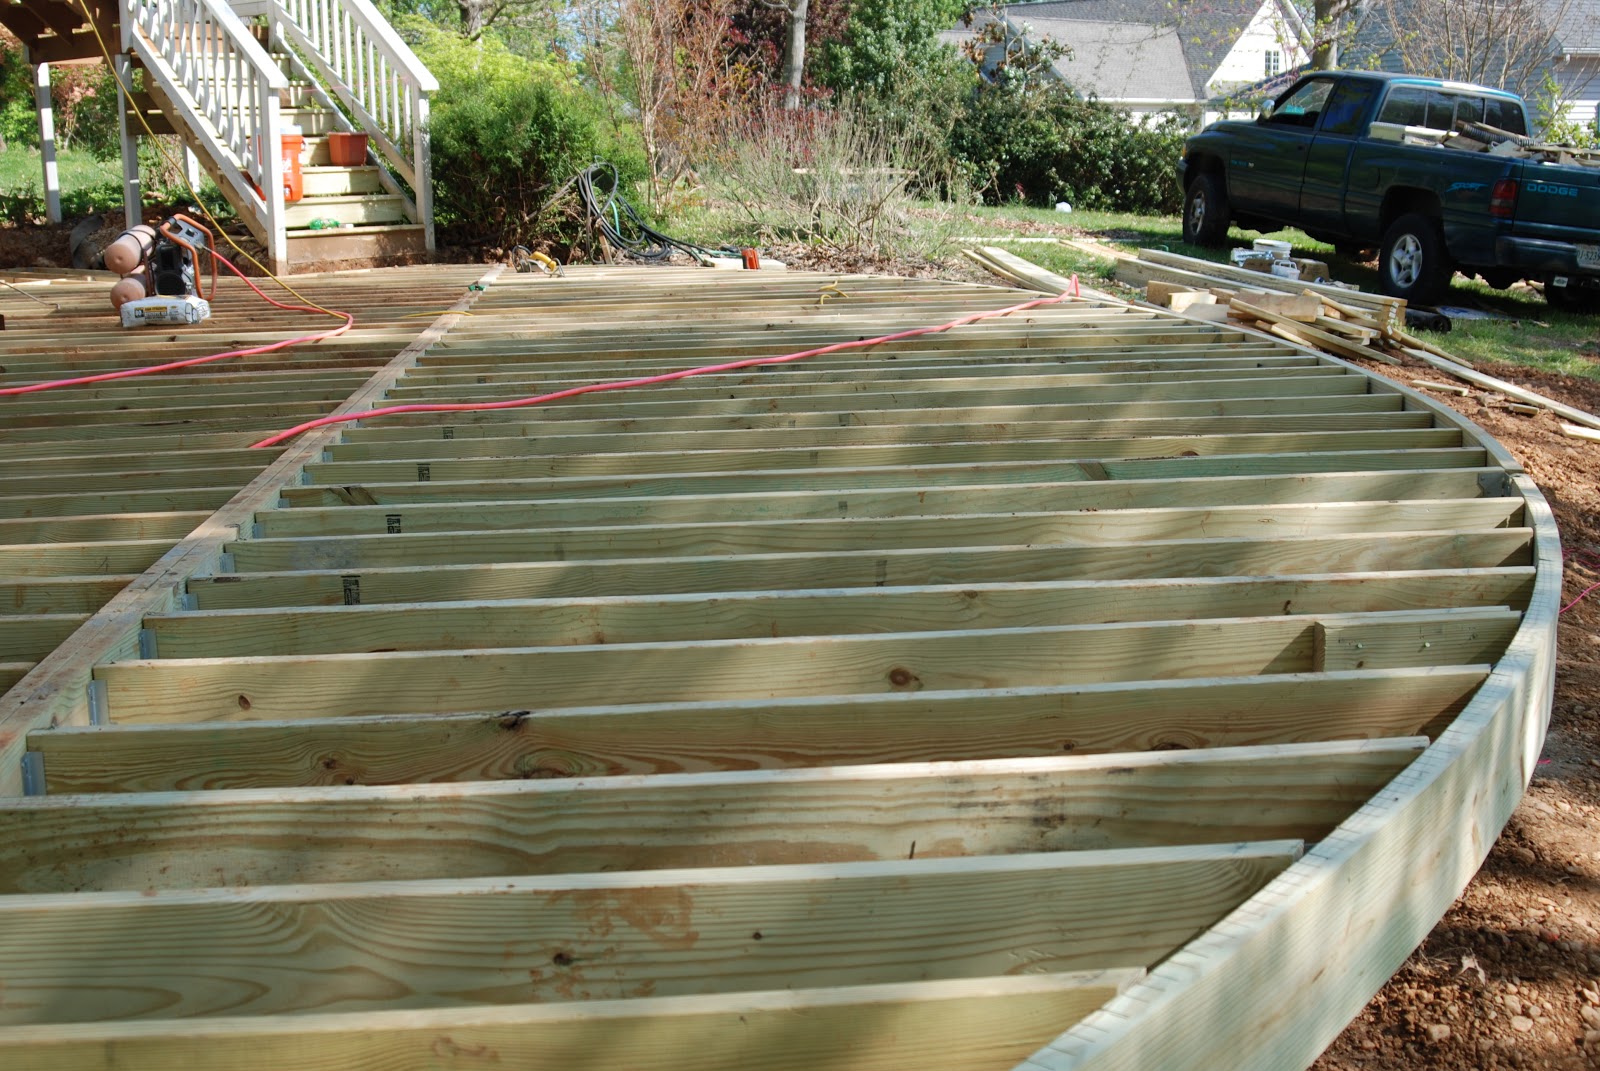 How To Set Support Beams And Rim Joists For A Wooden Deck Ask Home 